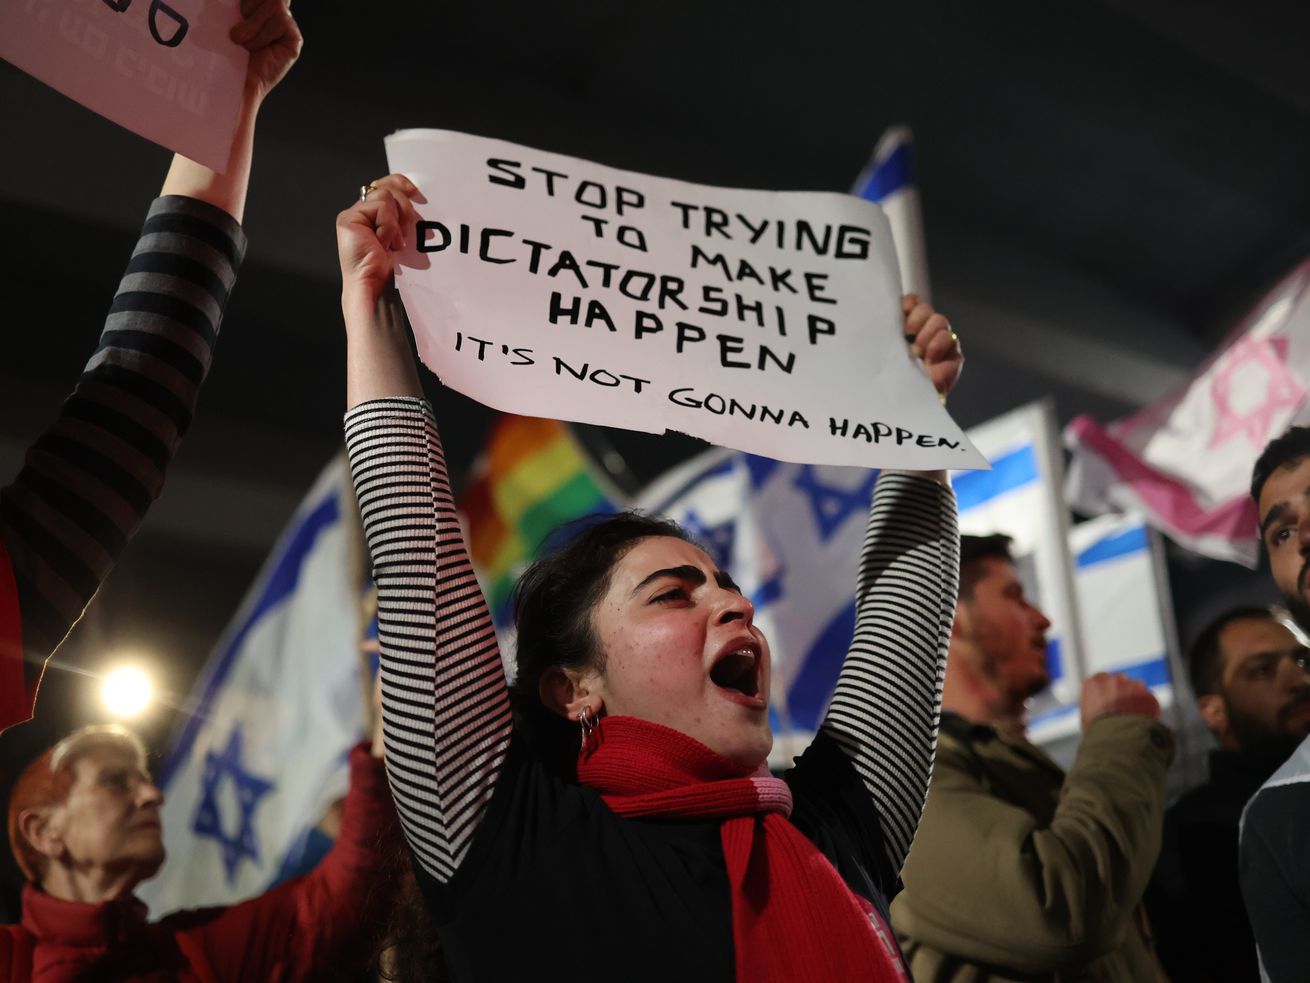 A protester in a crowd holds a sign above her head that reads, “Stop trying to make dictatorship happen. It’s not gonna happen.”